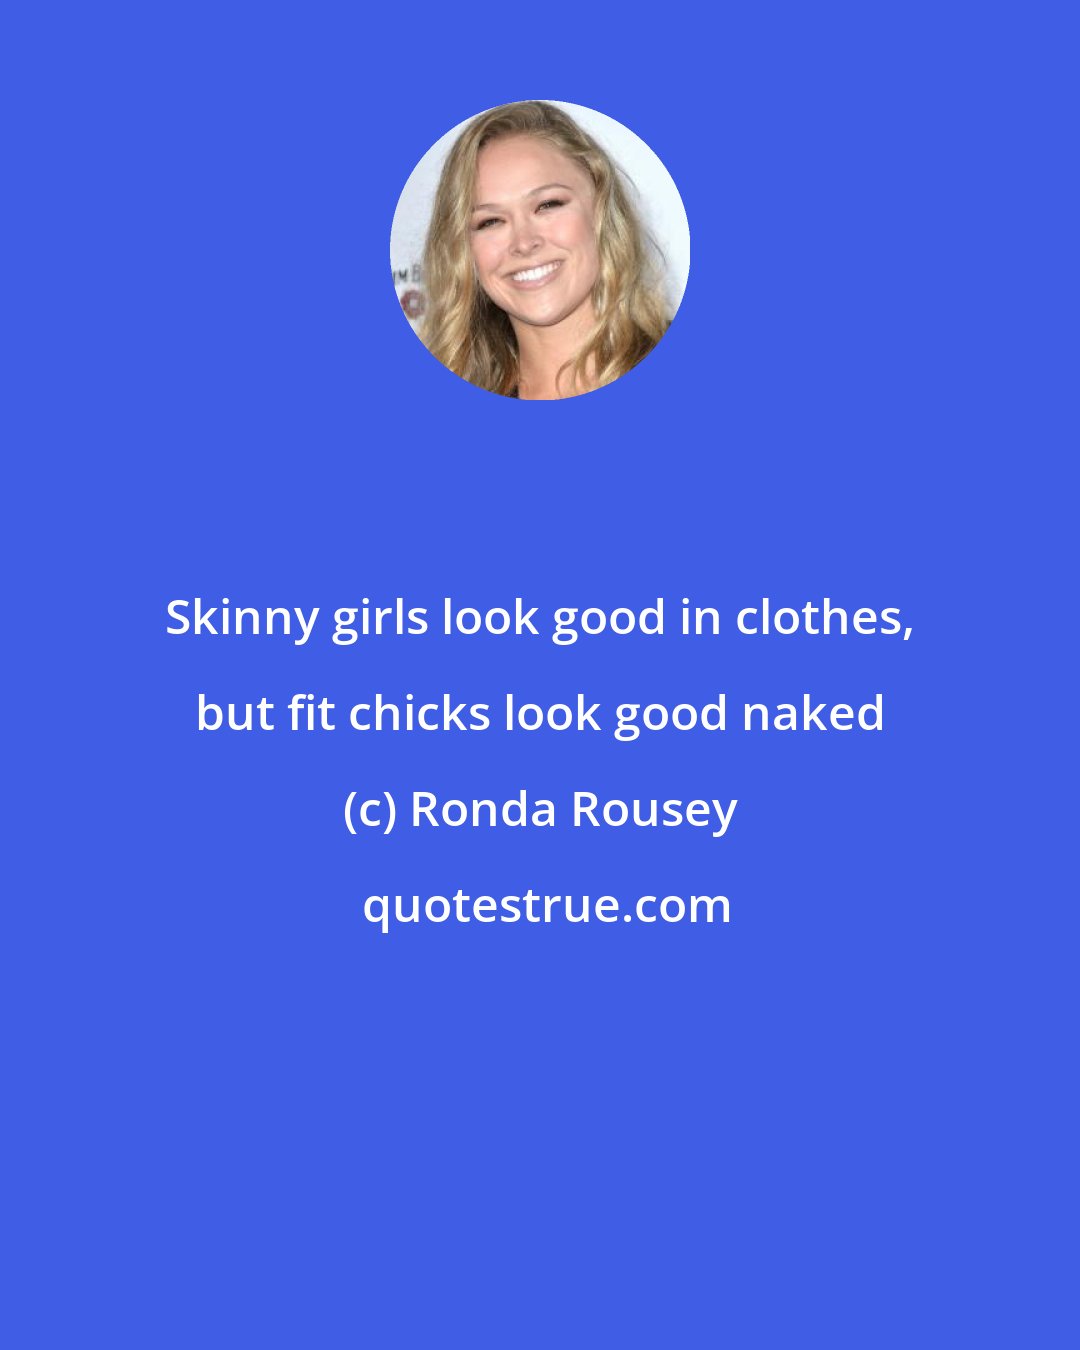 Ronda Rousey: Skinny girls look good in clothes, but fit chicks look good naked